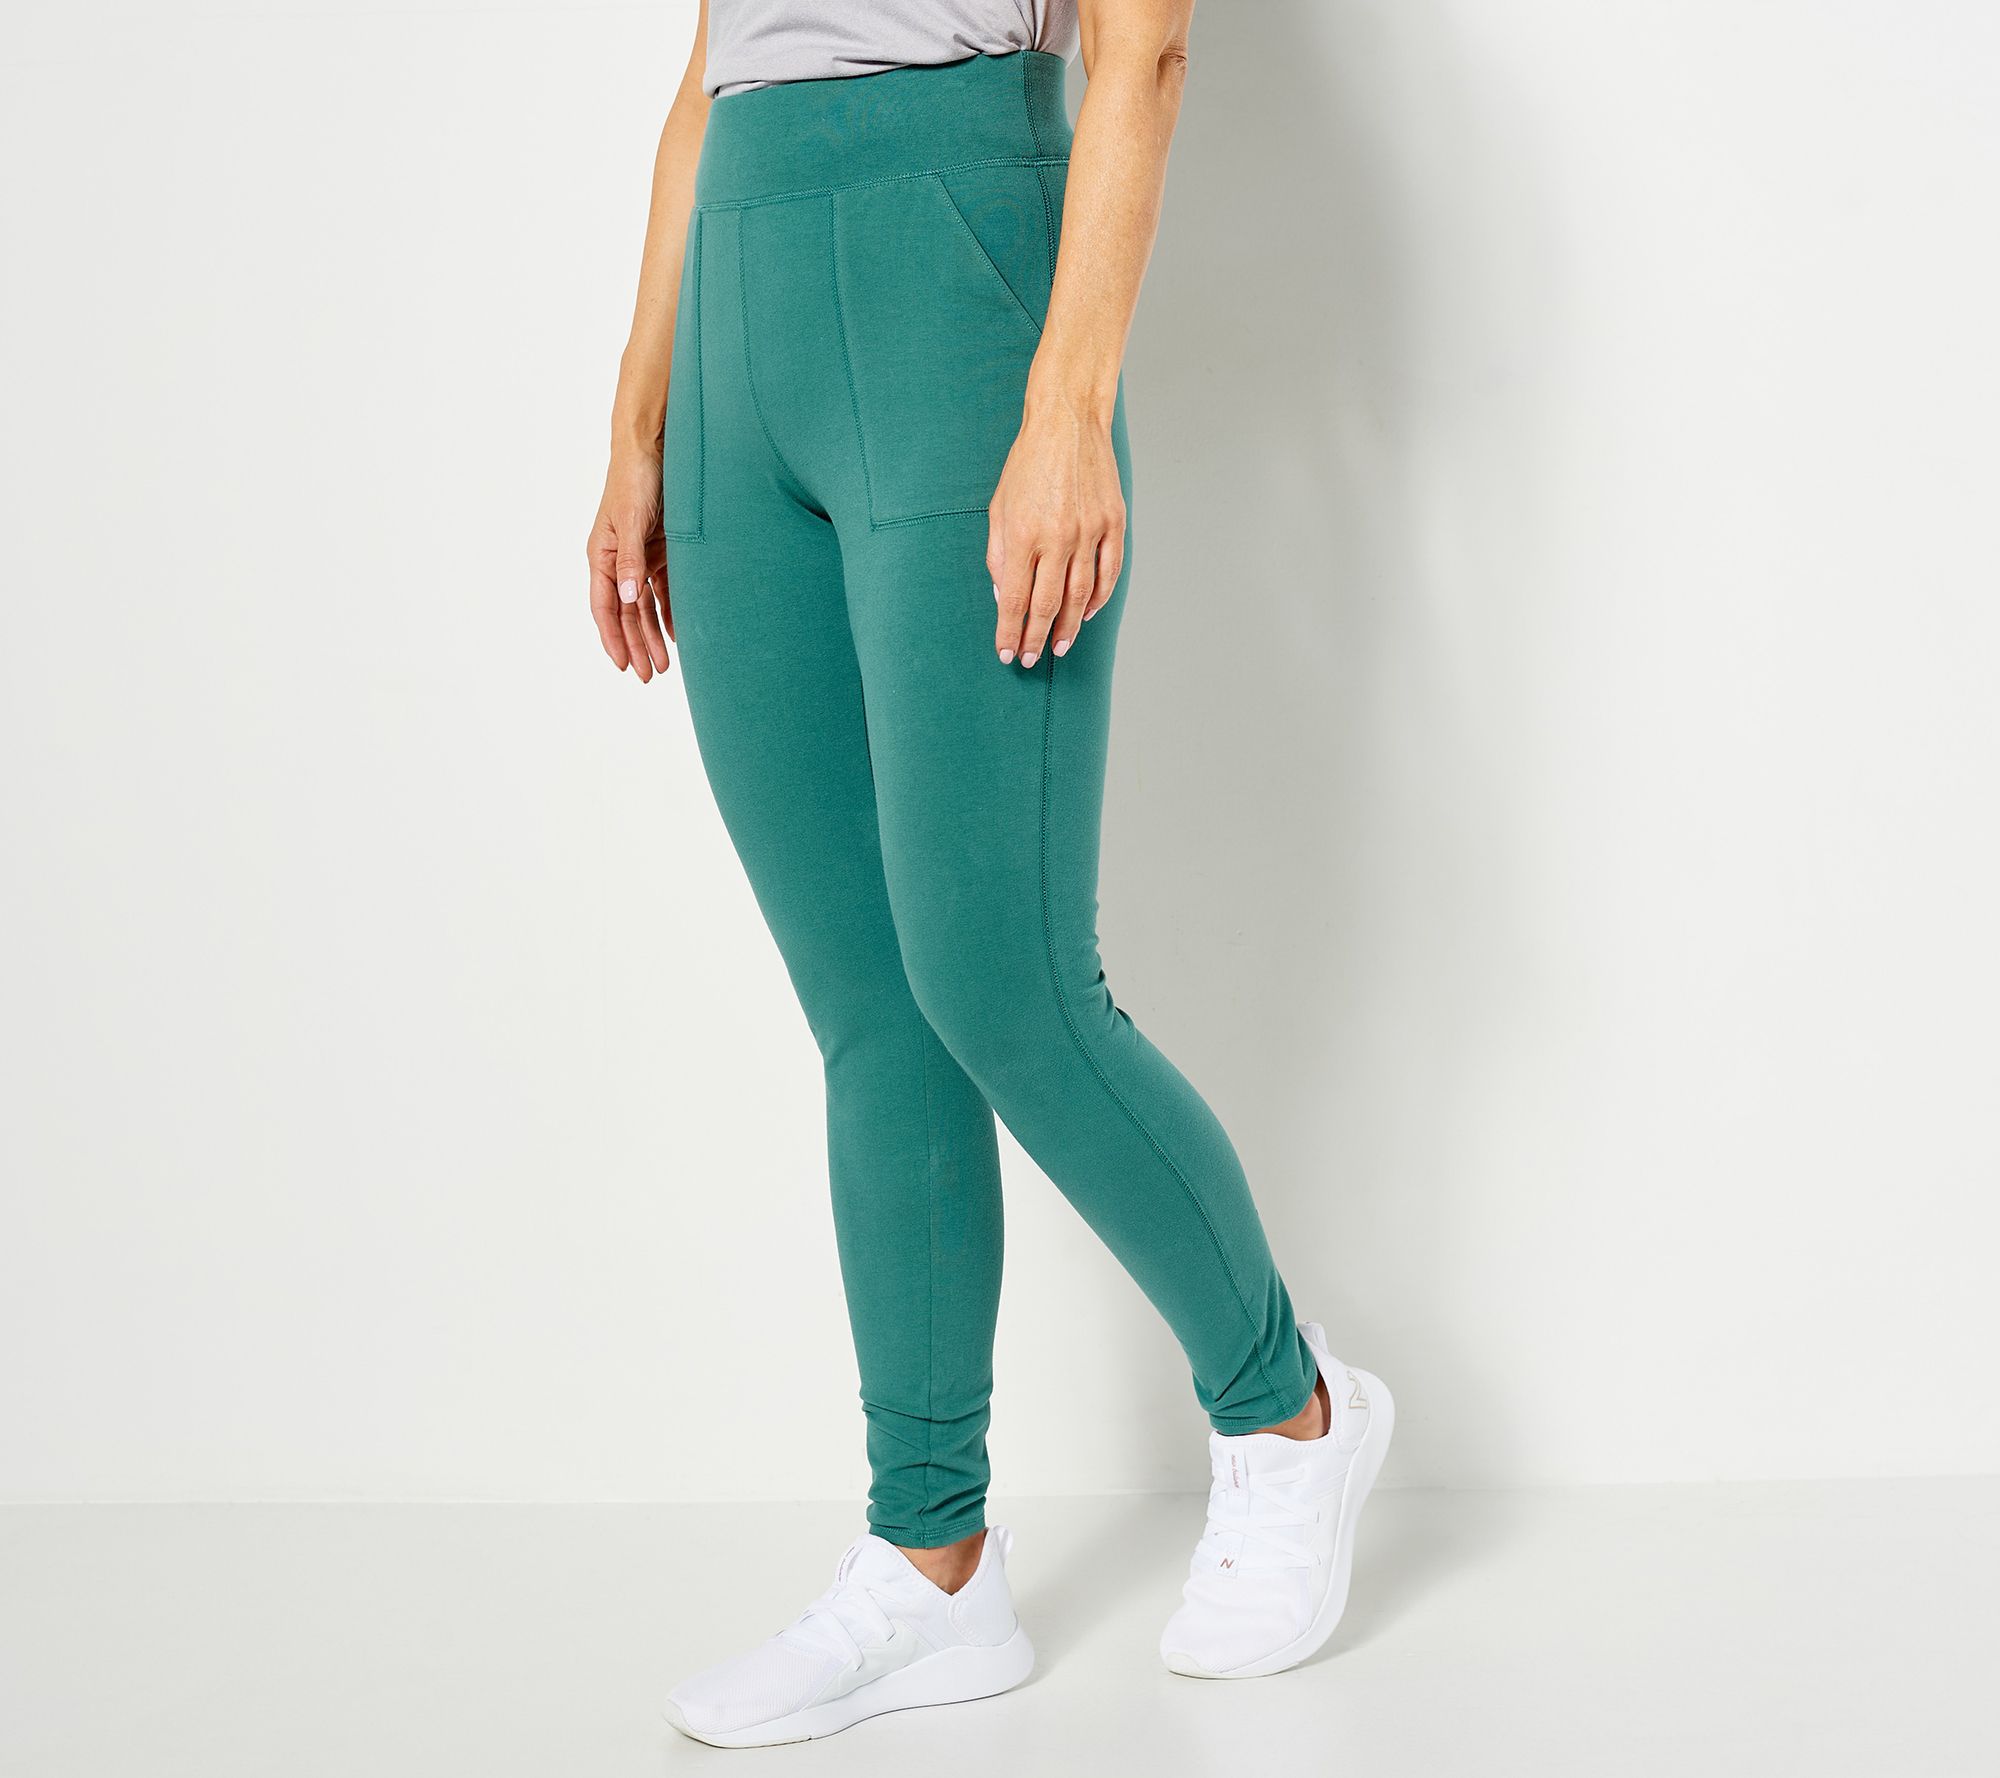 Denim & Co. Active Duo-Stretch Leggings with Back Seam on QVC 